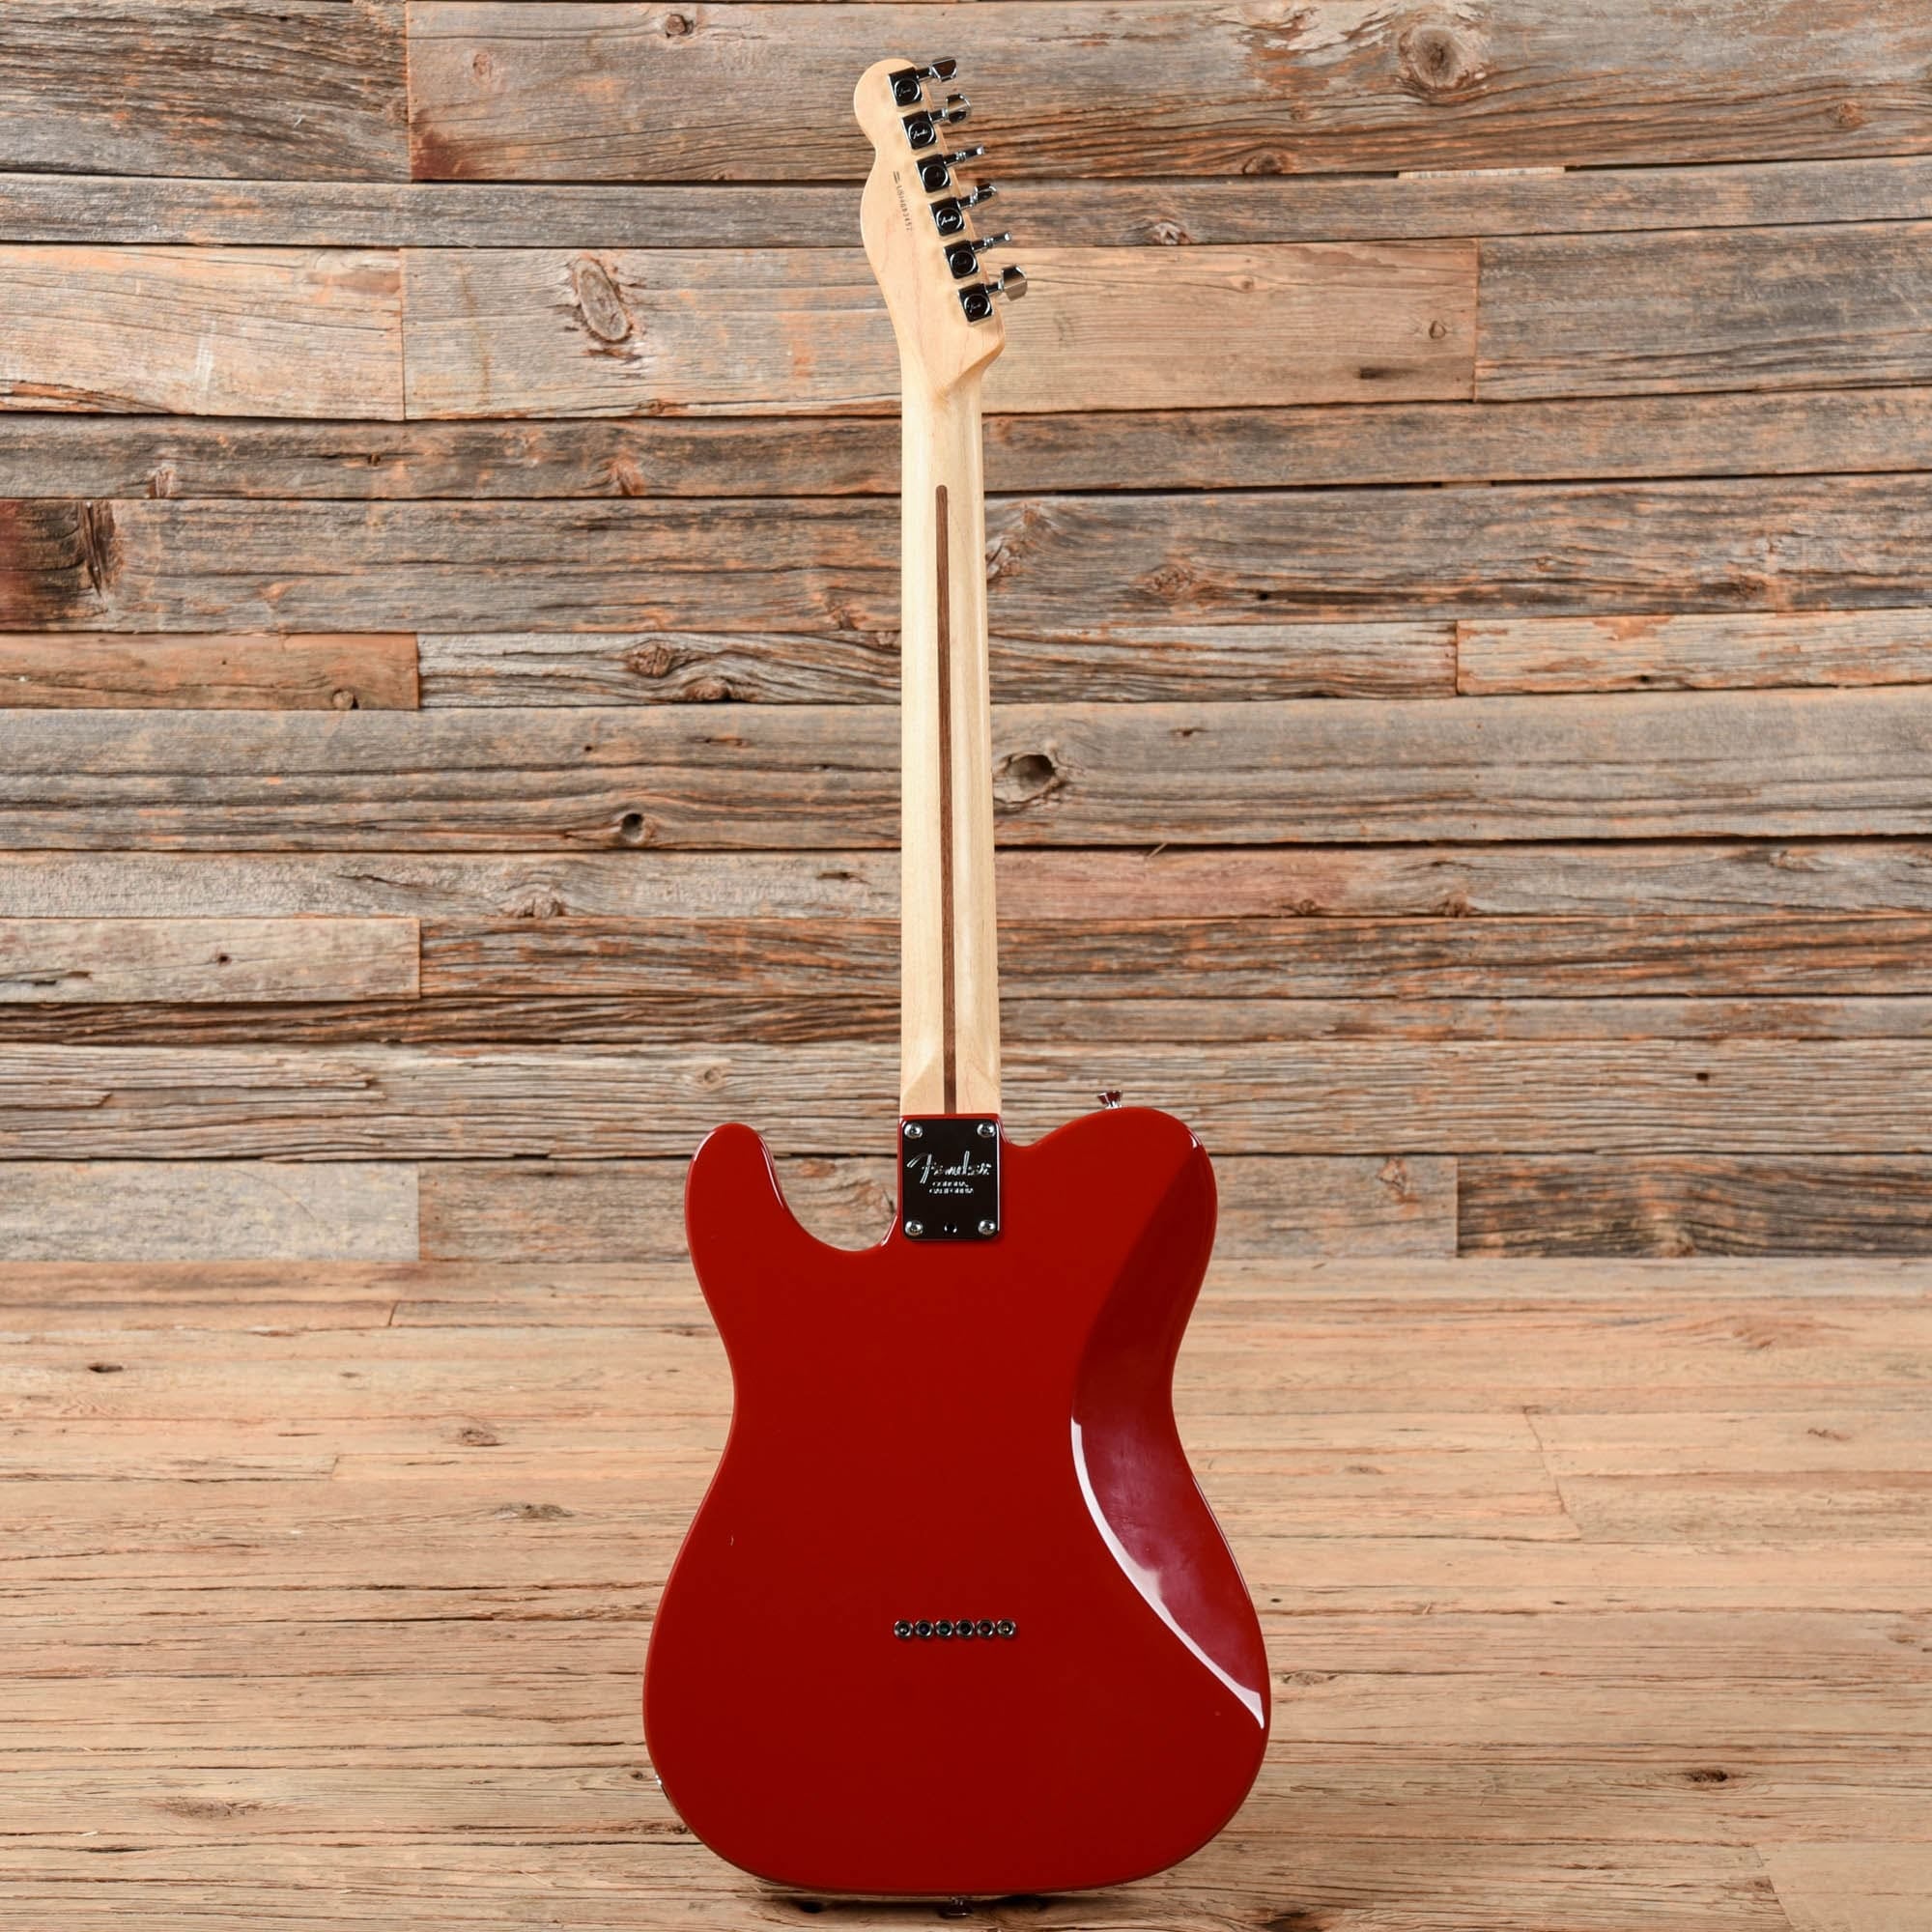 Fender Limited Edition American Standard Telecaster Channel Bound Dakota Red 2014 Electric Guitars / Solid Body